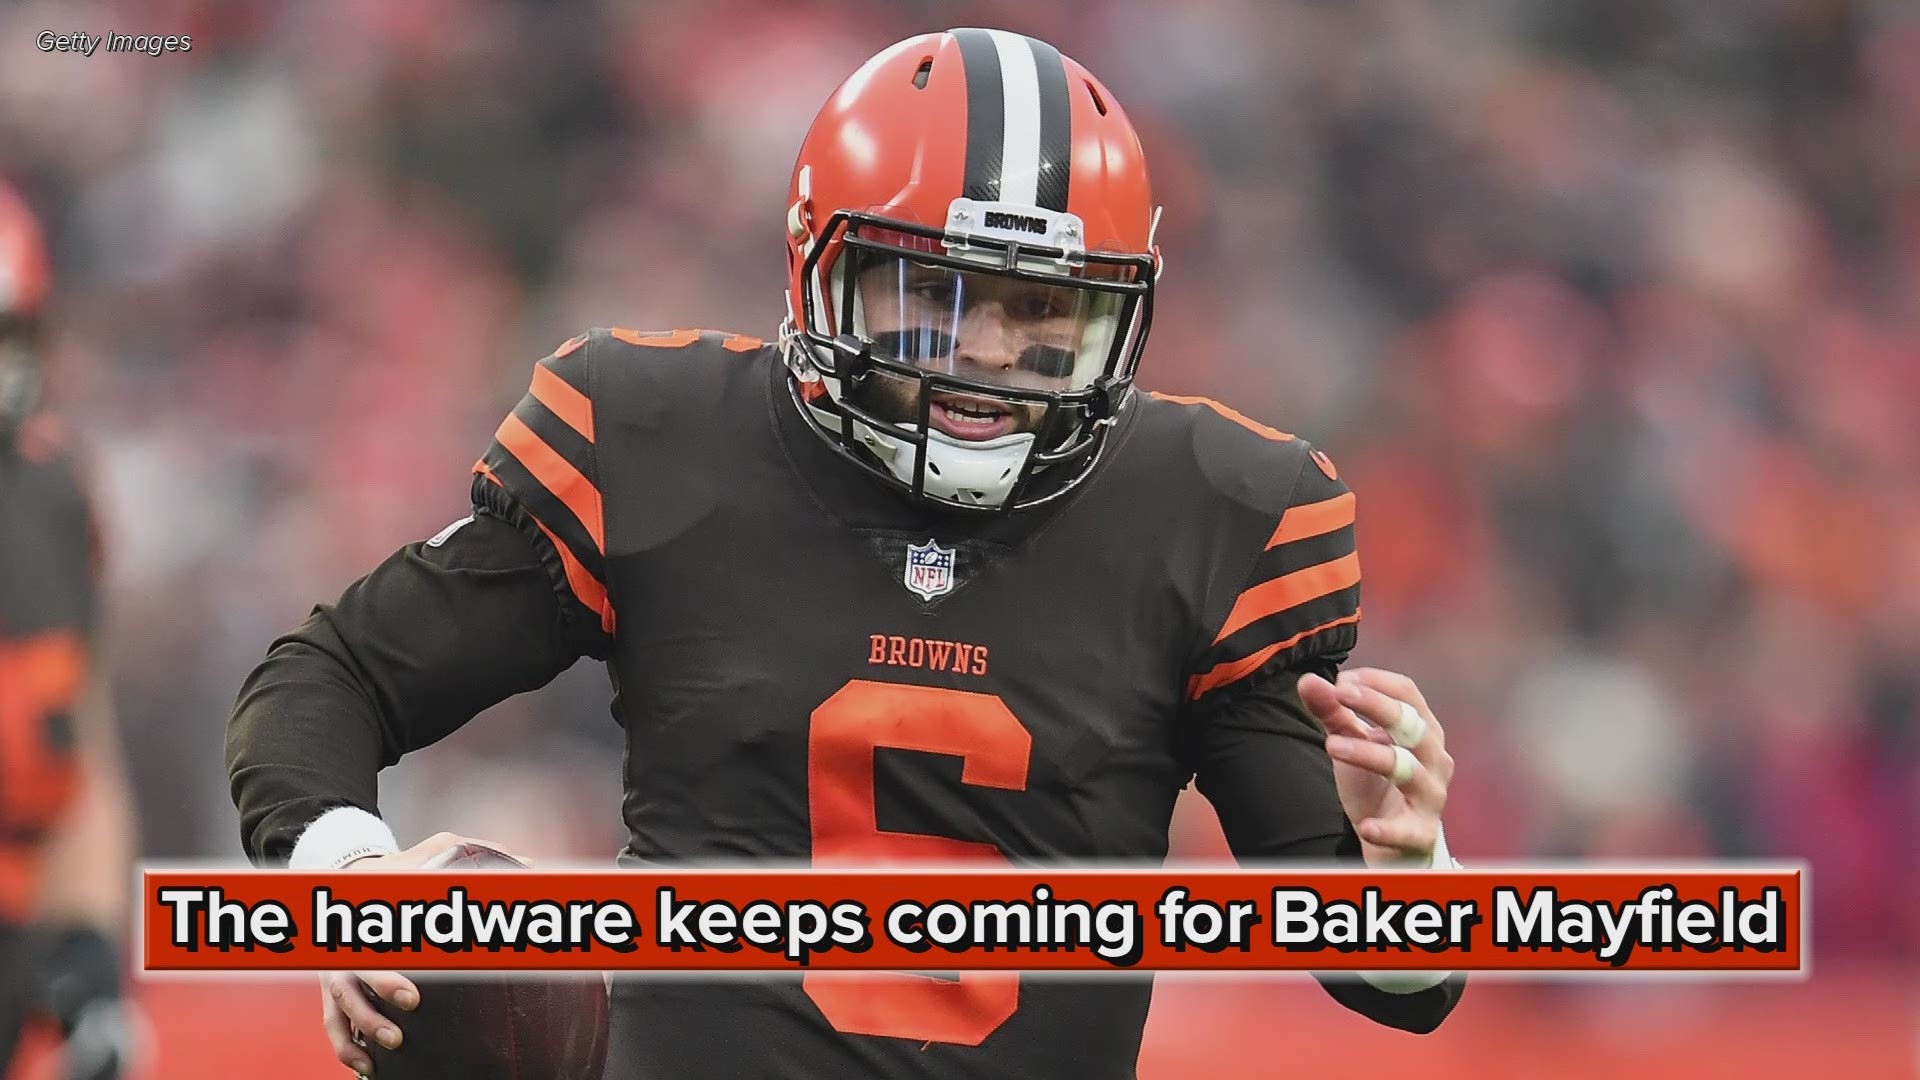 Mayfield completed 27 passes for 284 yards and 3 touchdowns in the Cleveland Browns' 26-18 victory over the Cincinnati Bengals.